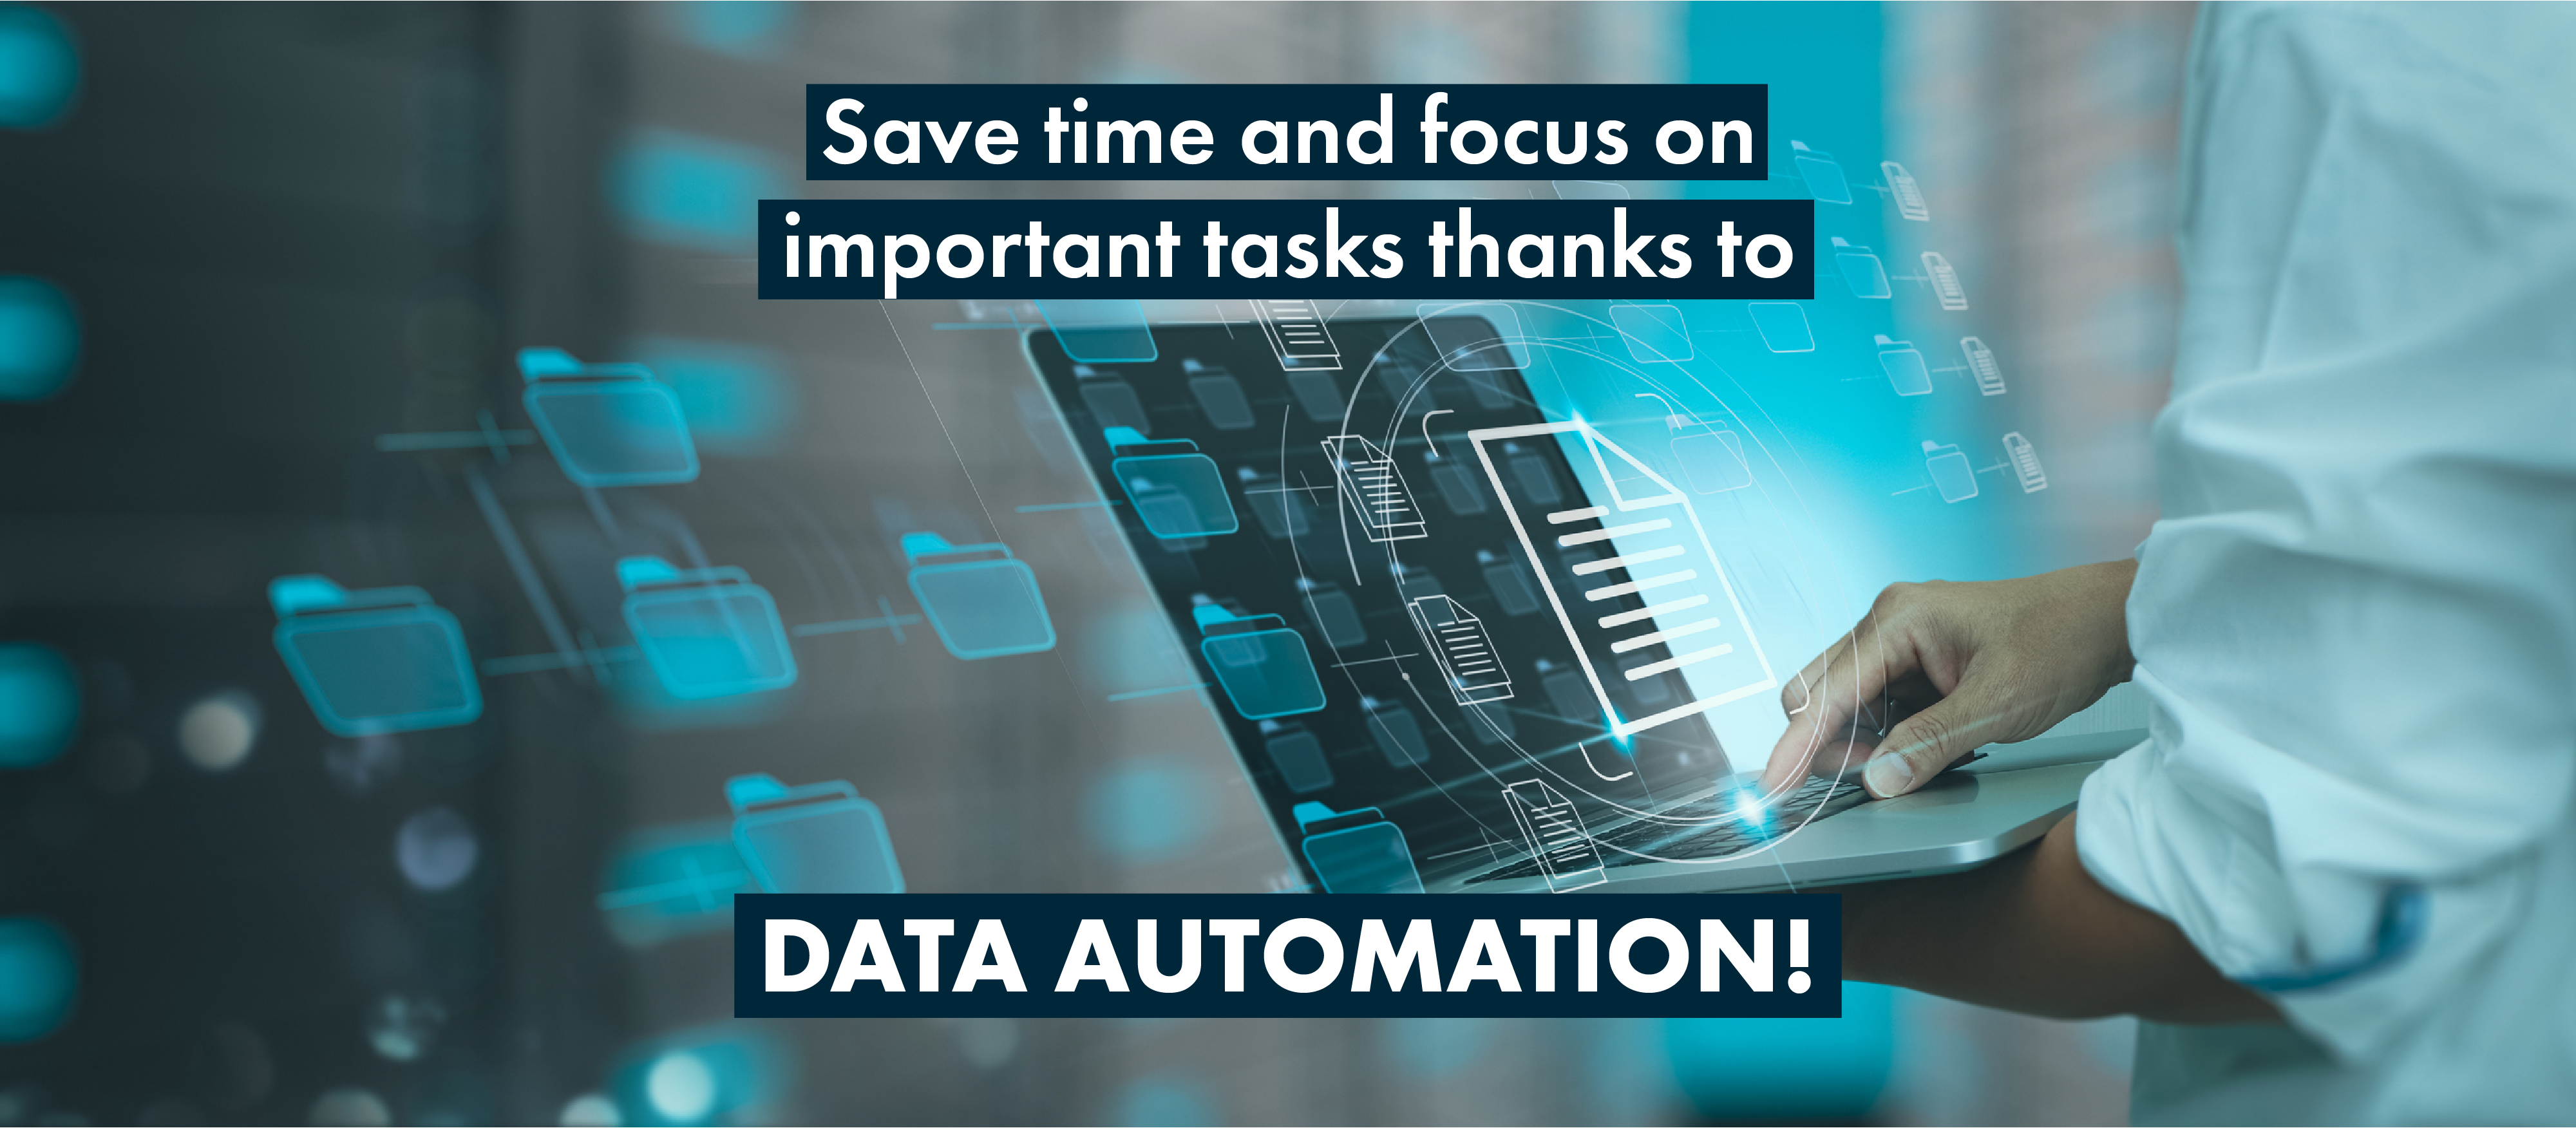 Save time and focus on important tasks with Data automation